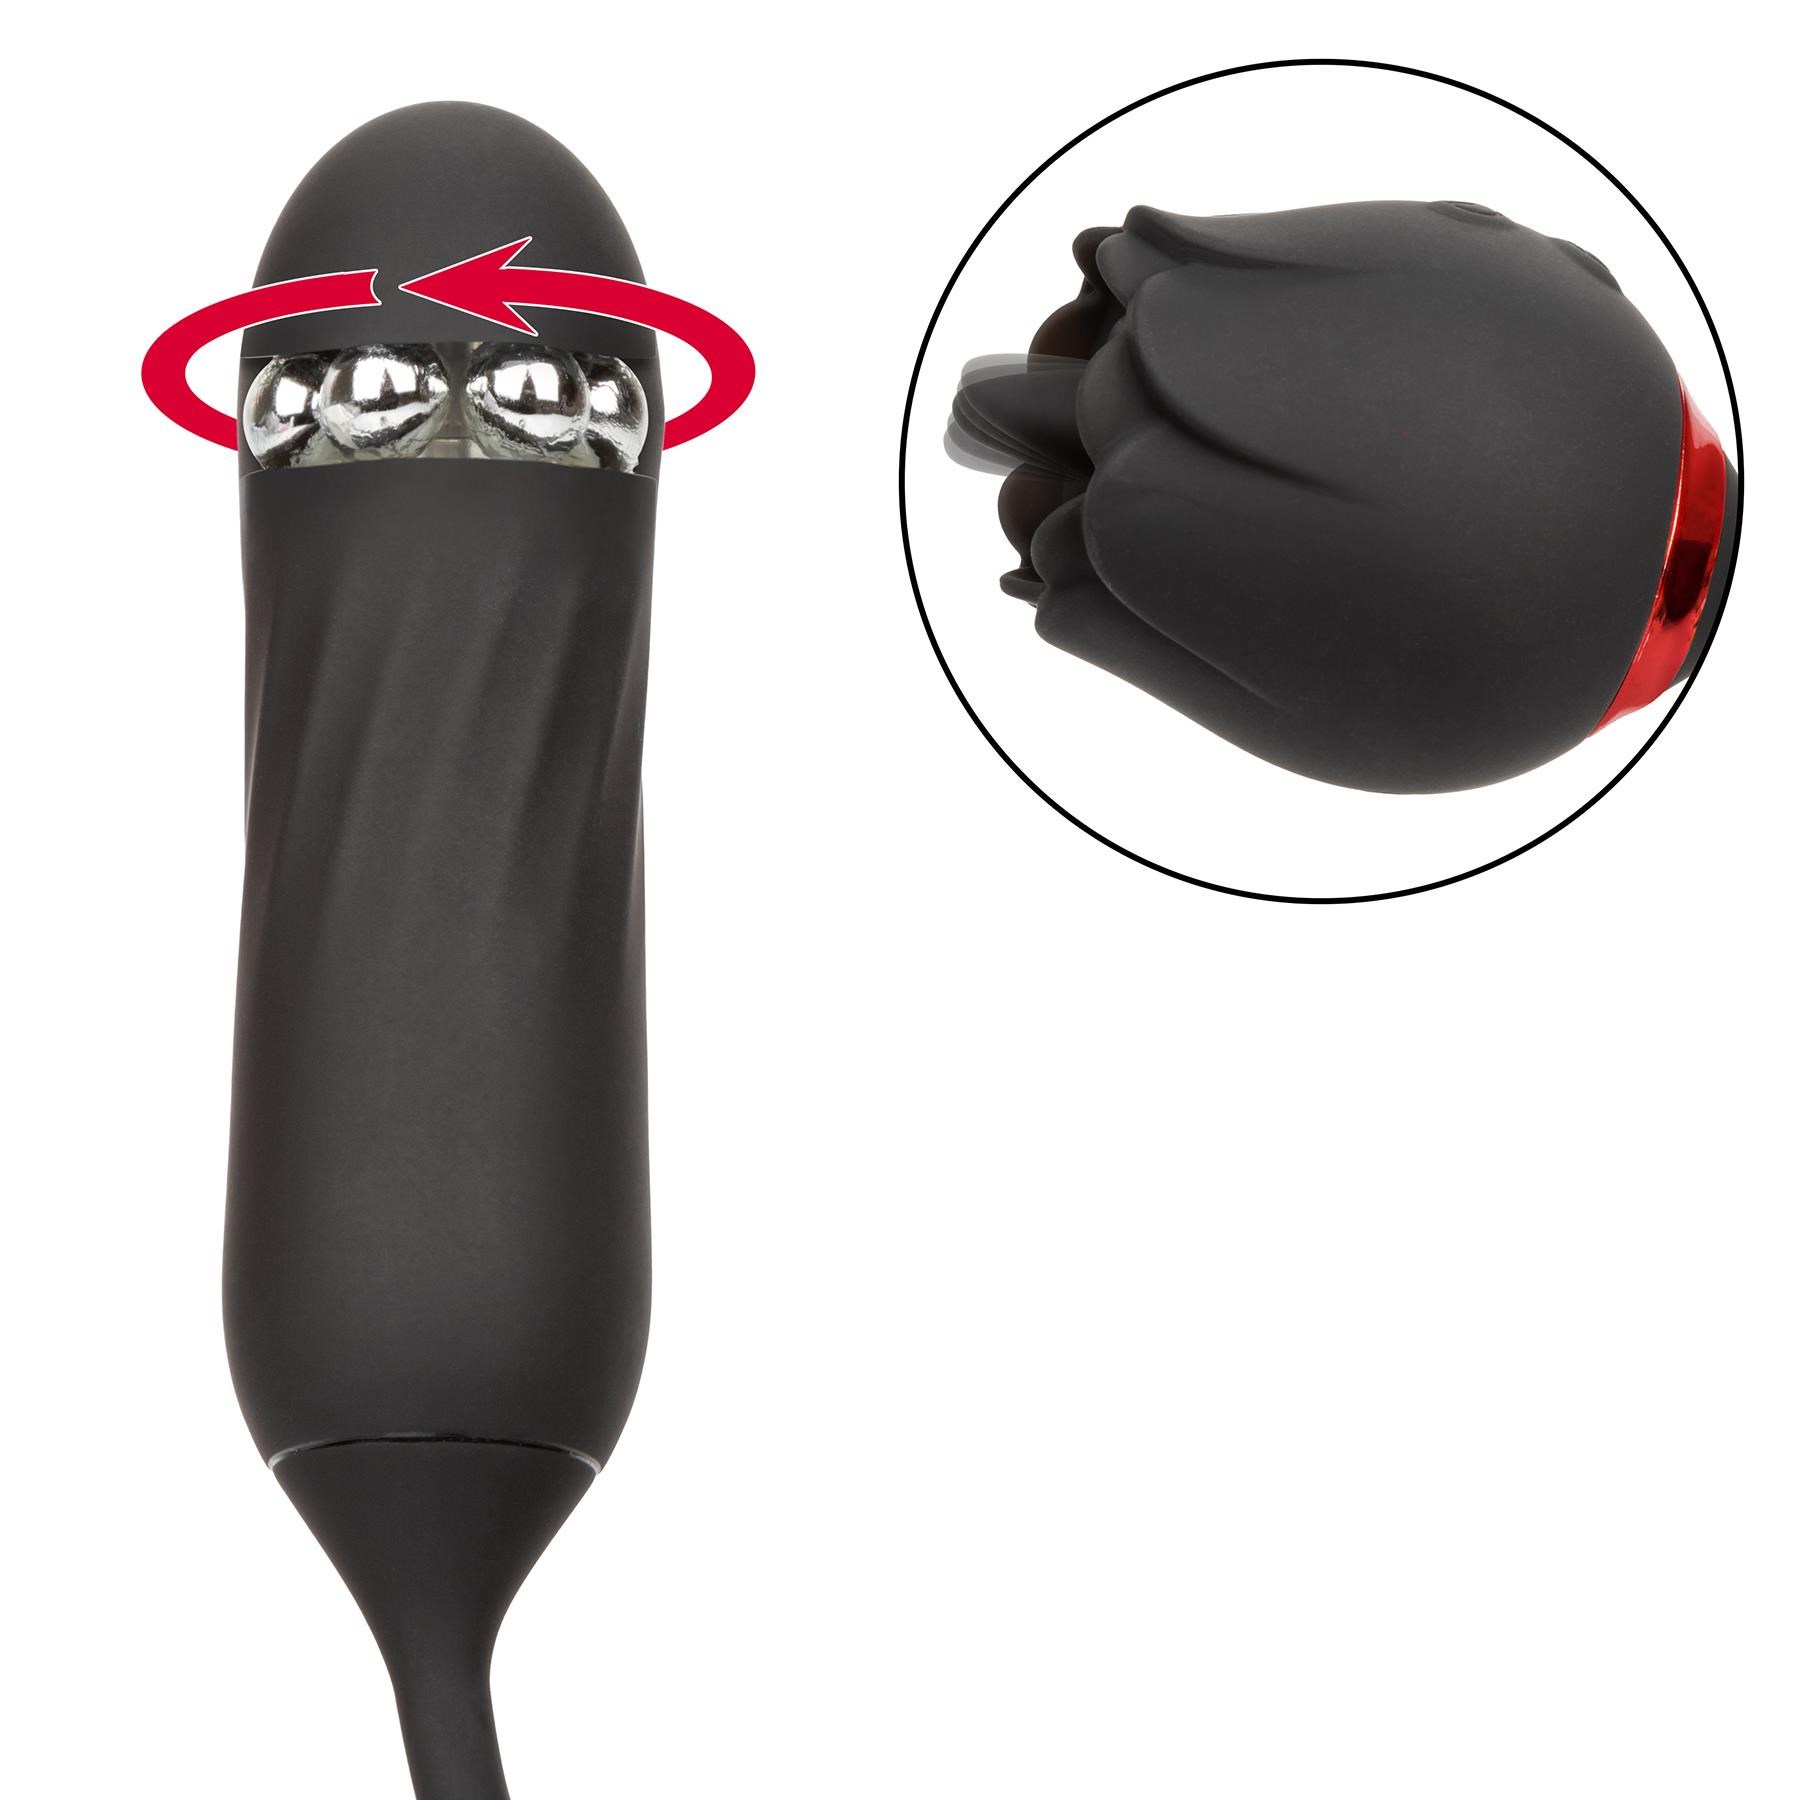 French Kiss Elite Lover Clitorial and Rotating Anal Vibrator - Product Shot - Showing Features